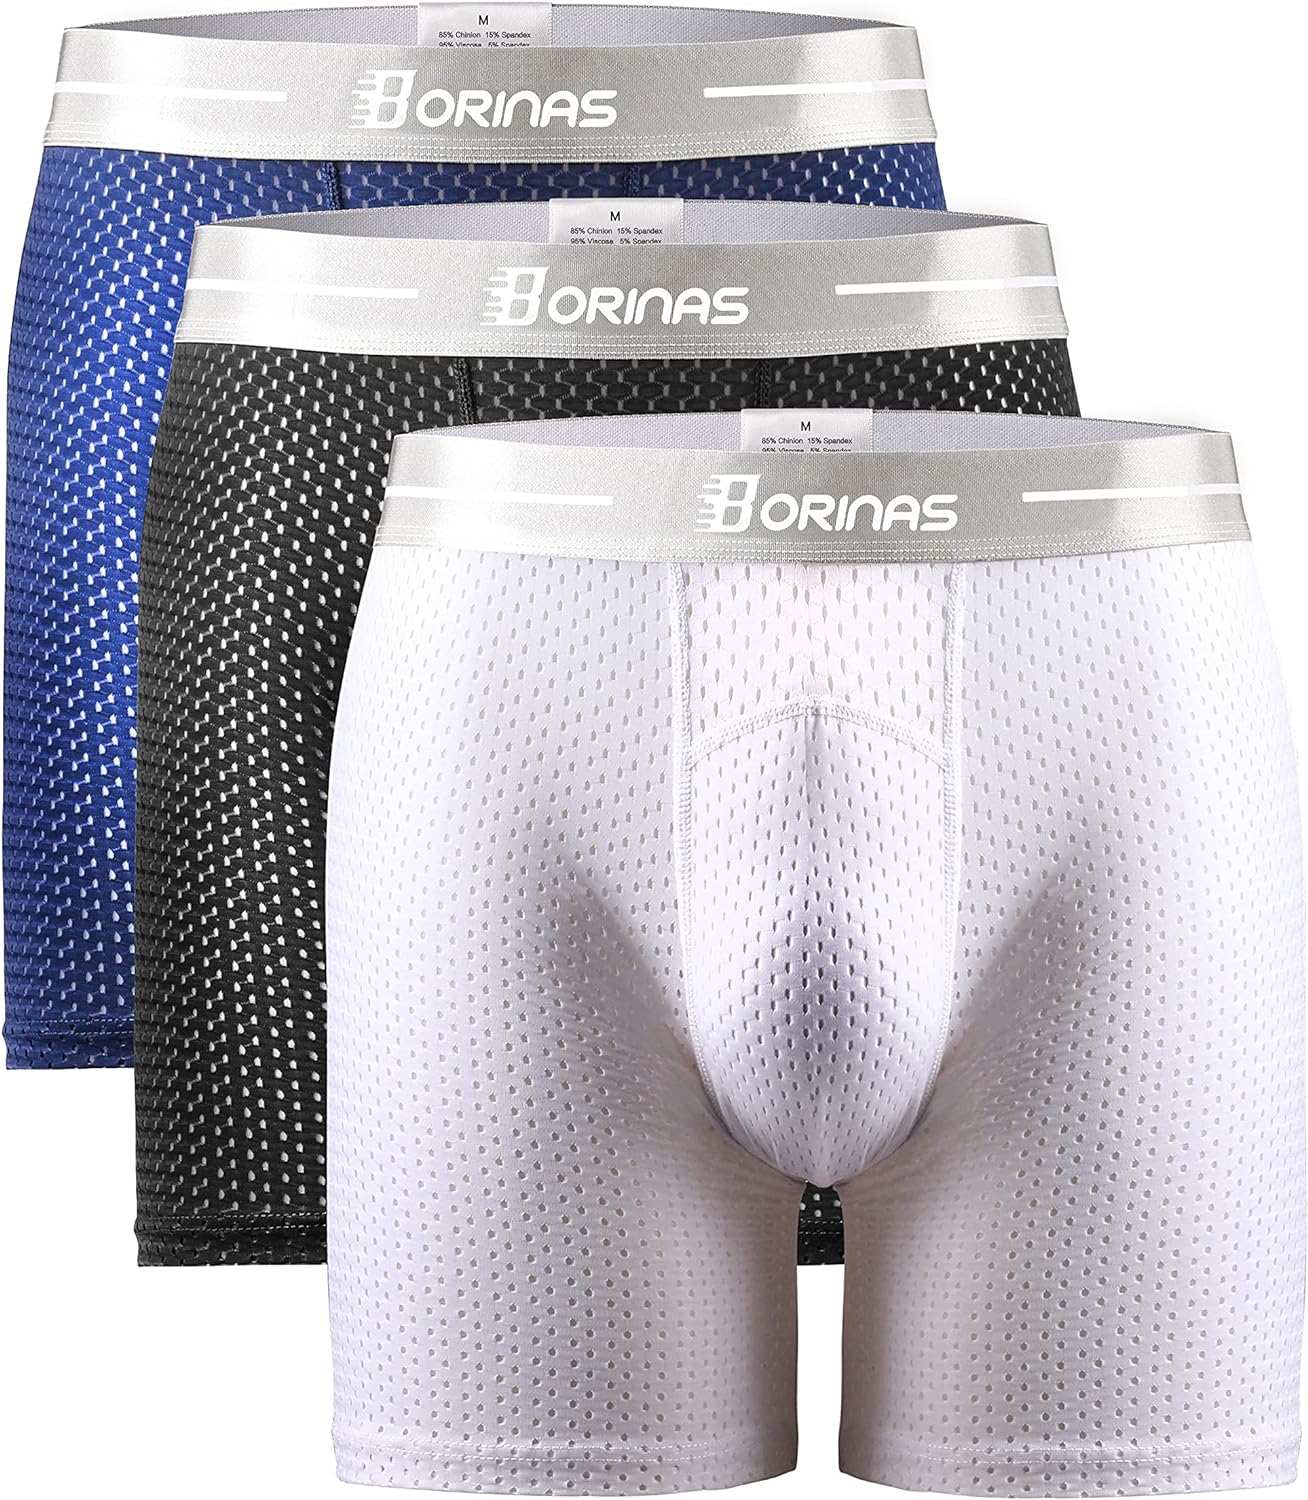 Haness Breathable Underwear: How To Keep Comfort & Stay Dry Down There